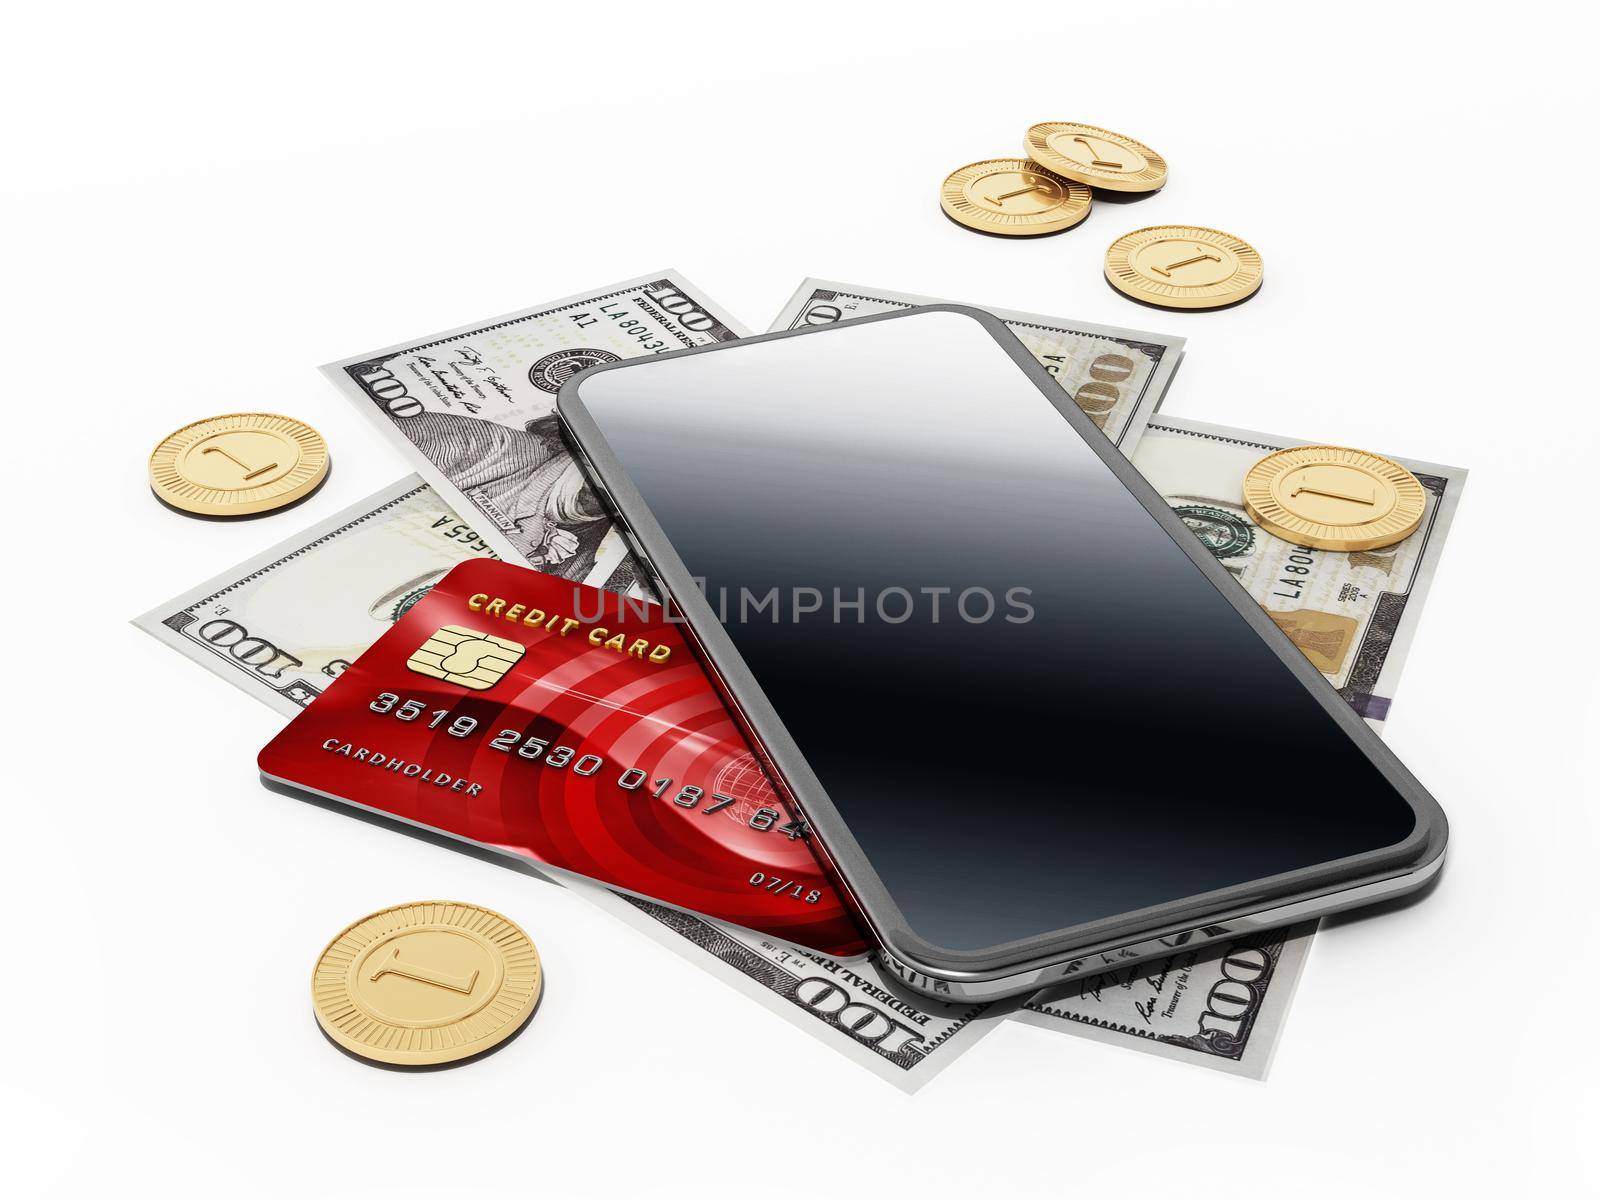 Smartphone, credit card and bills isolated on white background. 3D illustration by Simsek